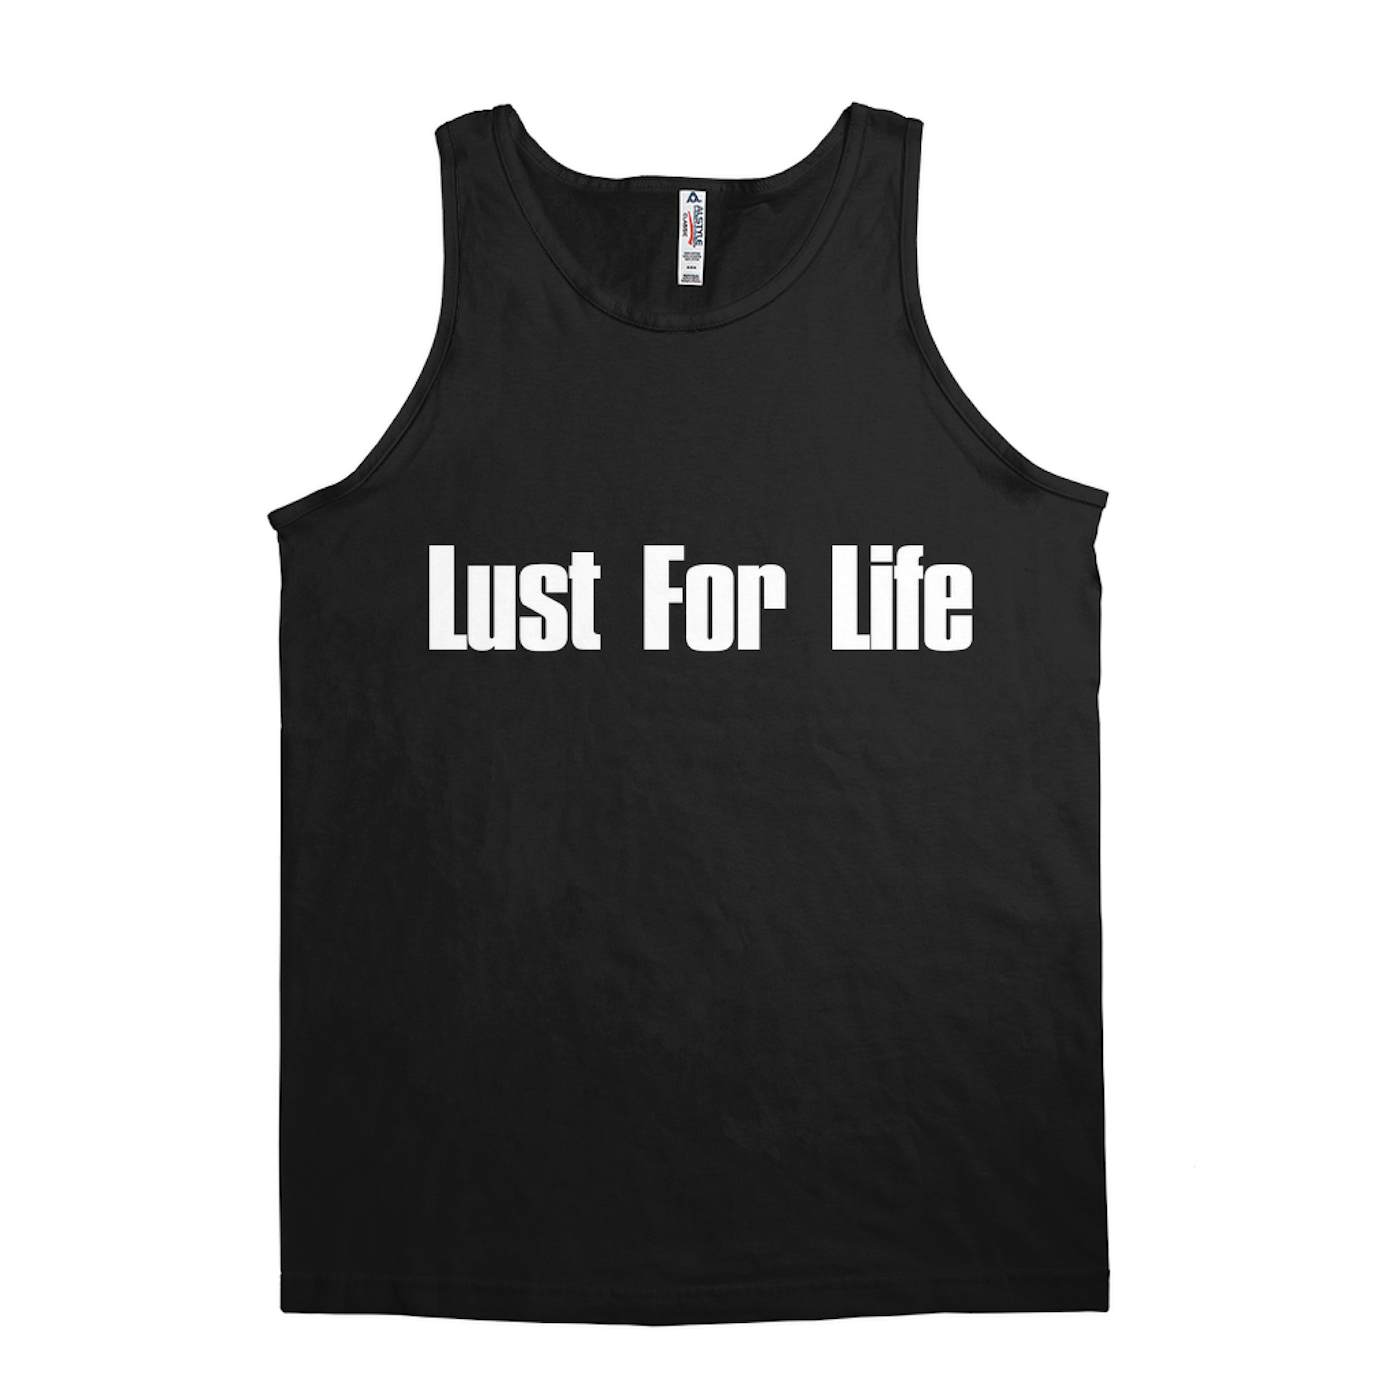 The Stooges Unisex Tank Top | Lust For Life Worn By Iggy Pop The Stooges Shirt